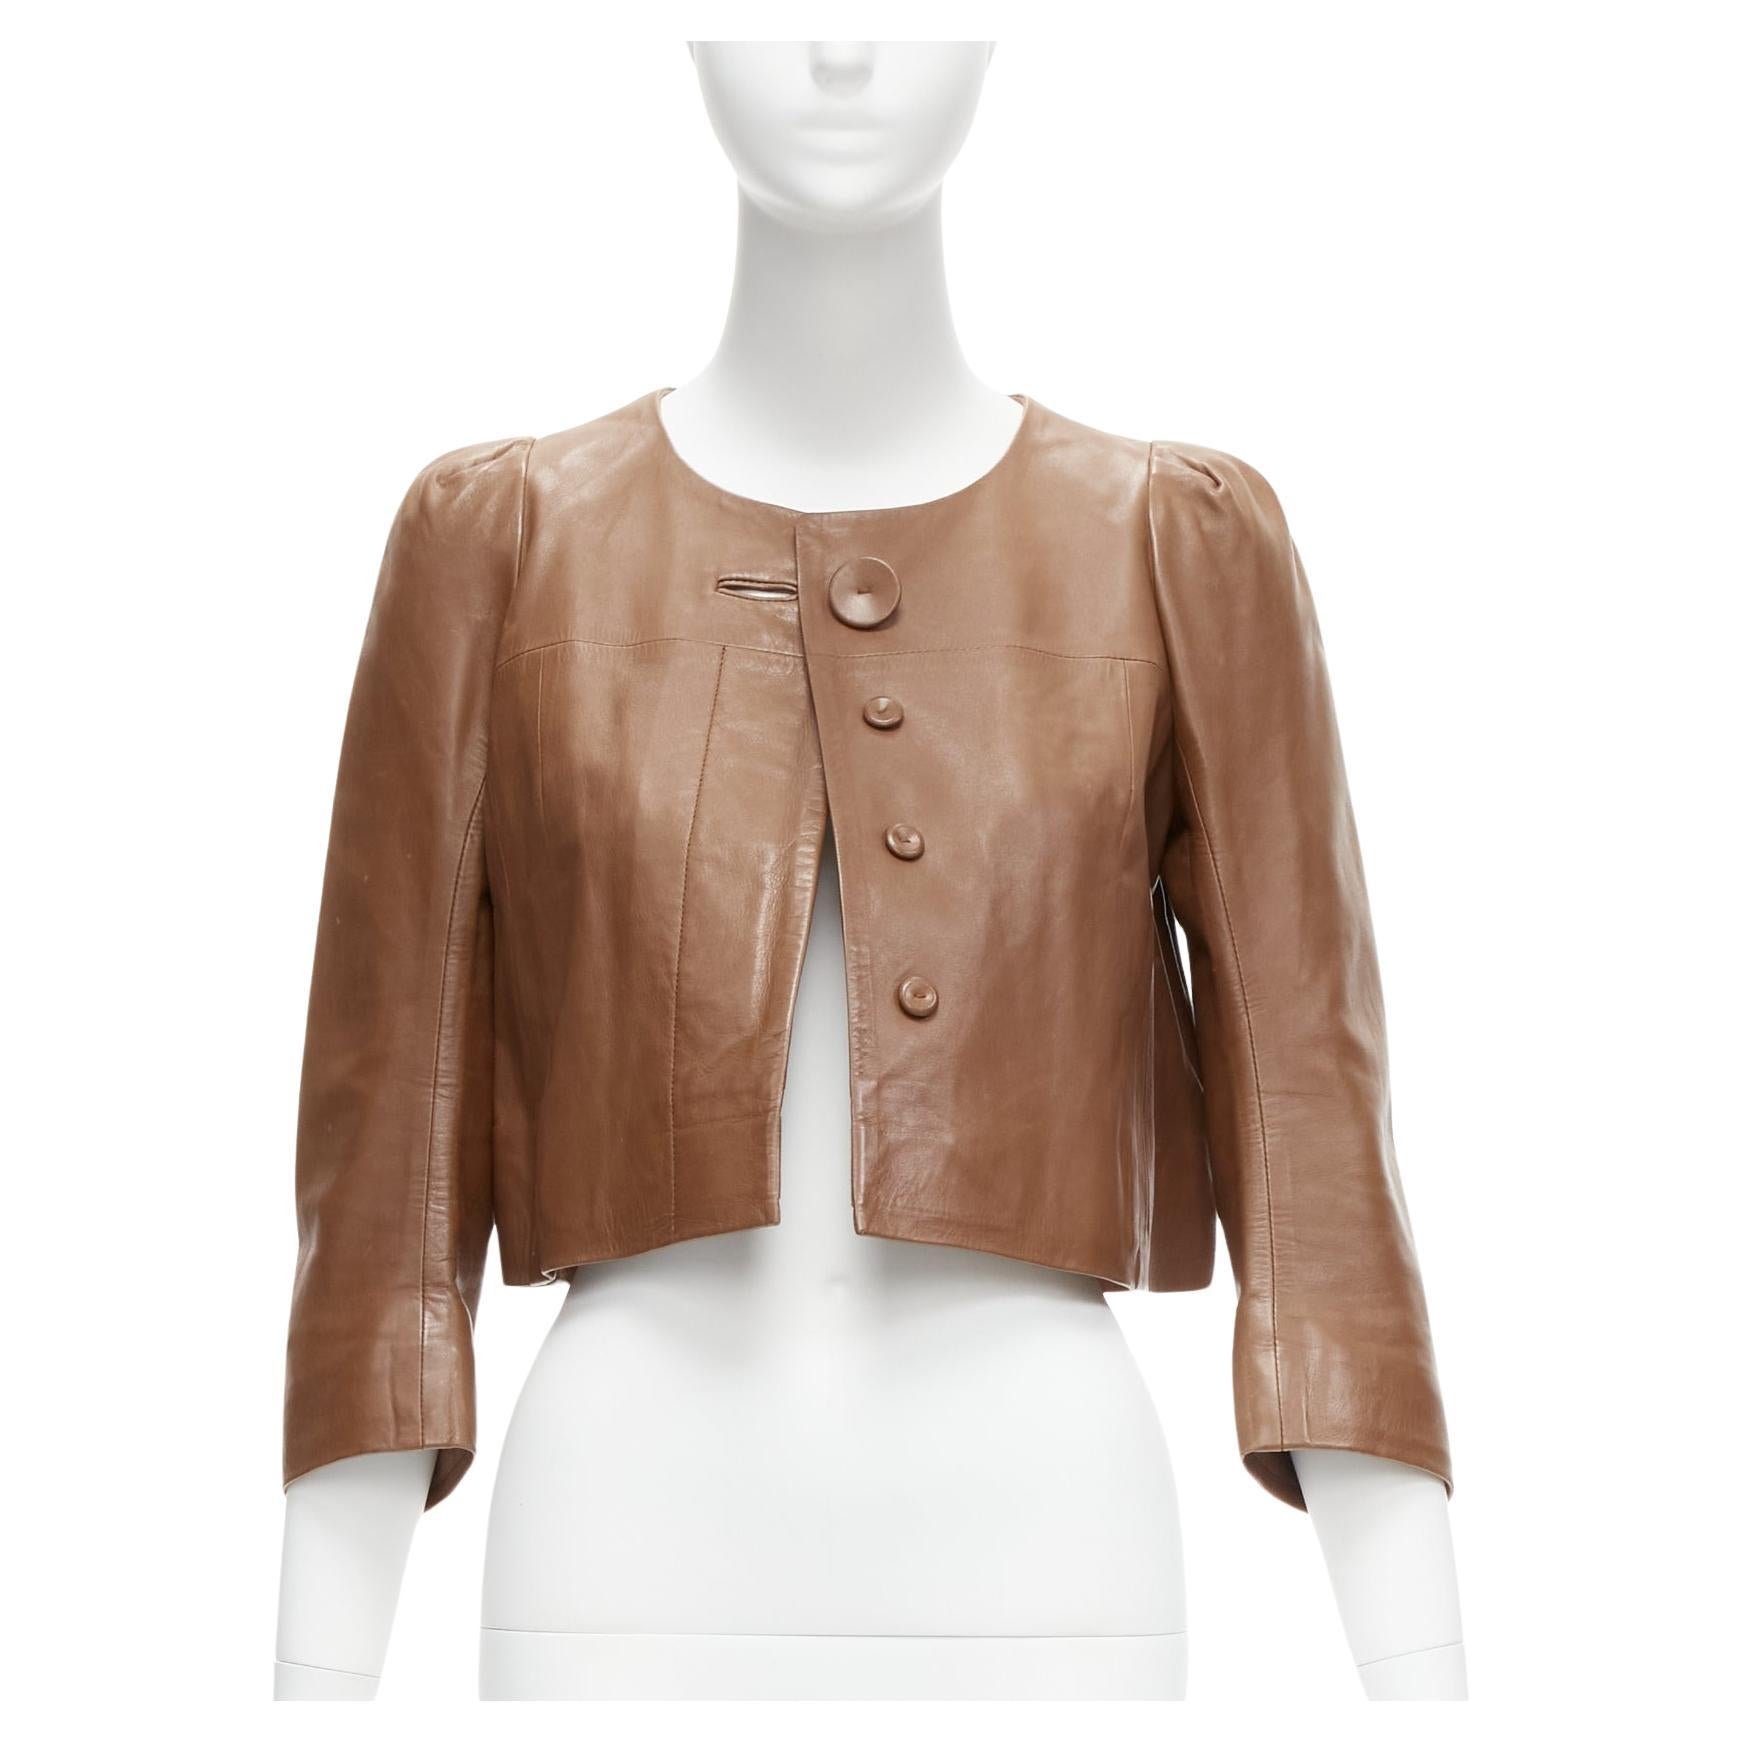 CHLOE tan brown lambskin leather big button cropped jacket FR36 S